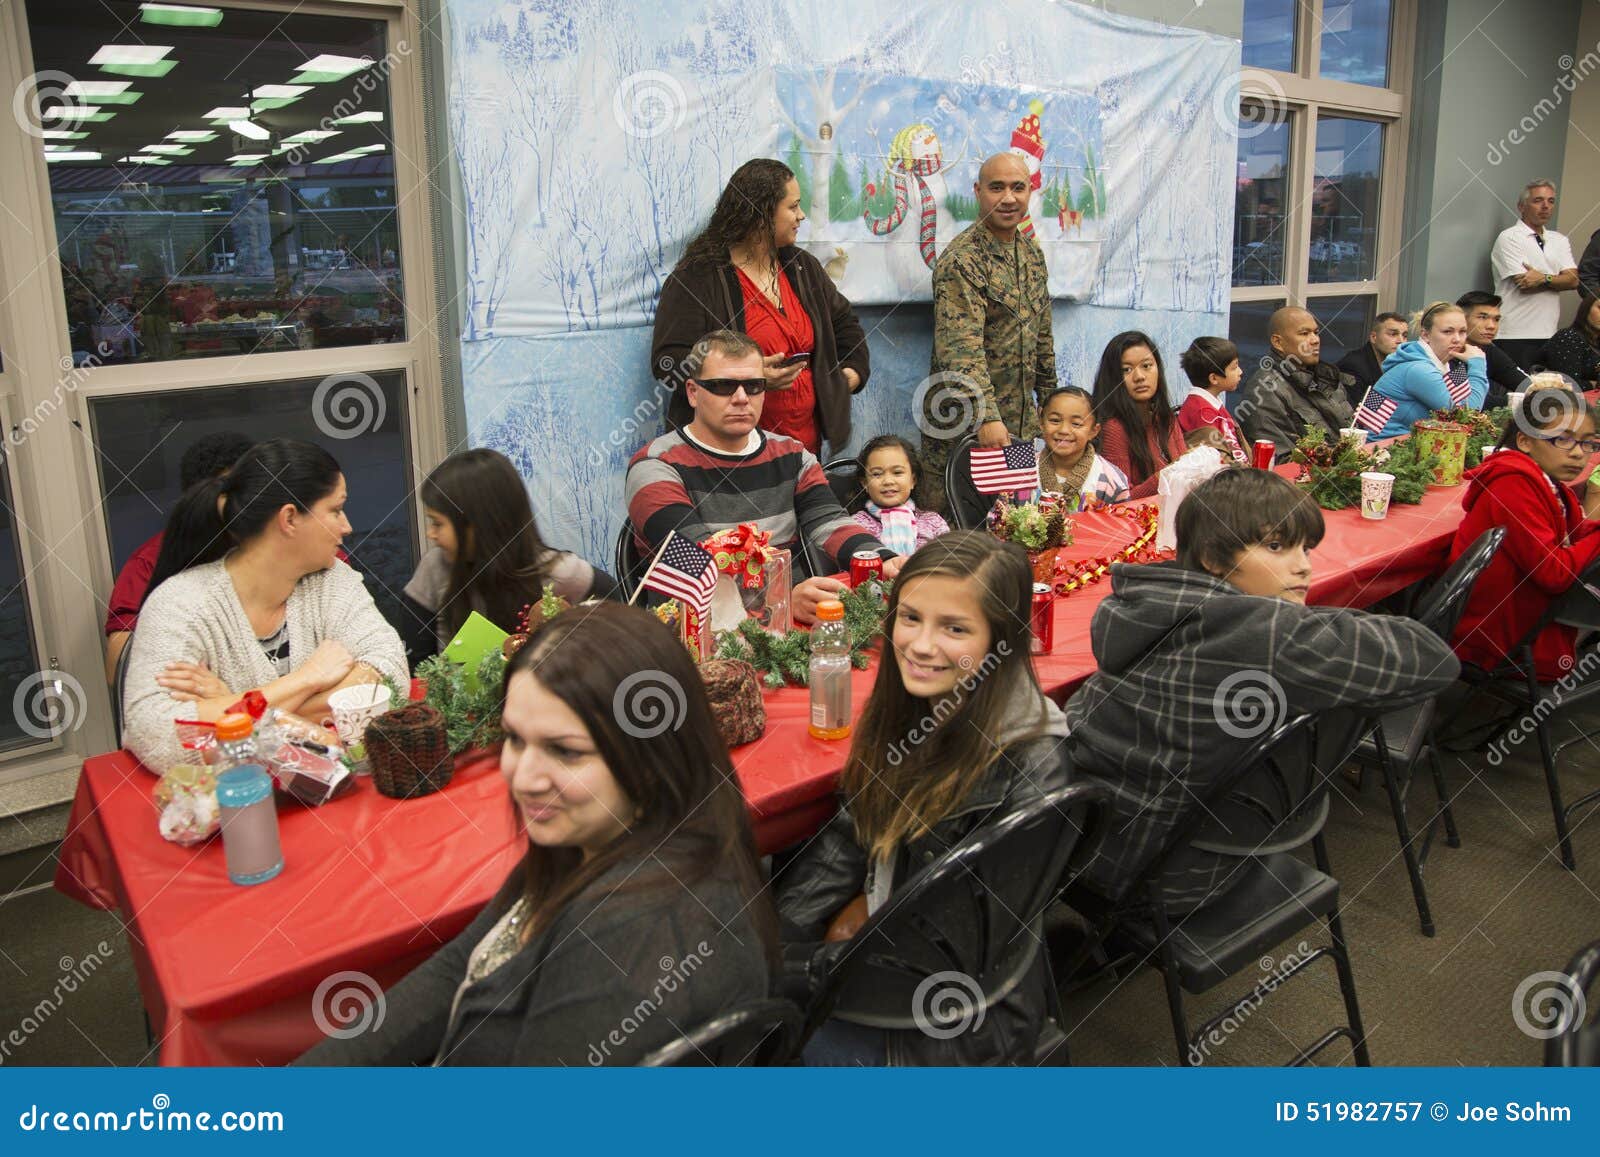 Christmas Dinner For US Soldiers At Wounded Warrior Center ...